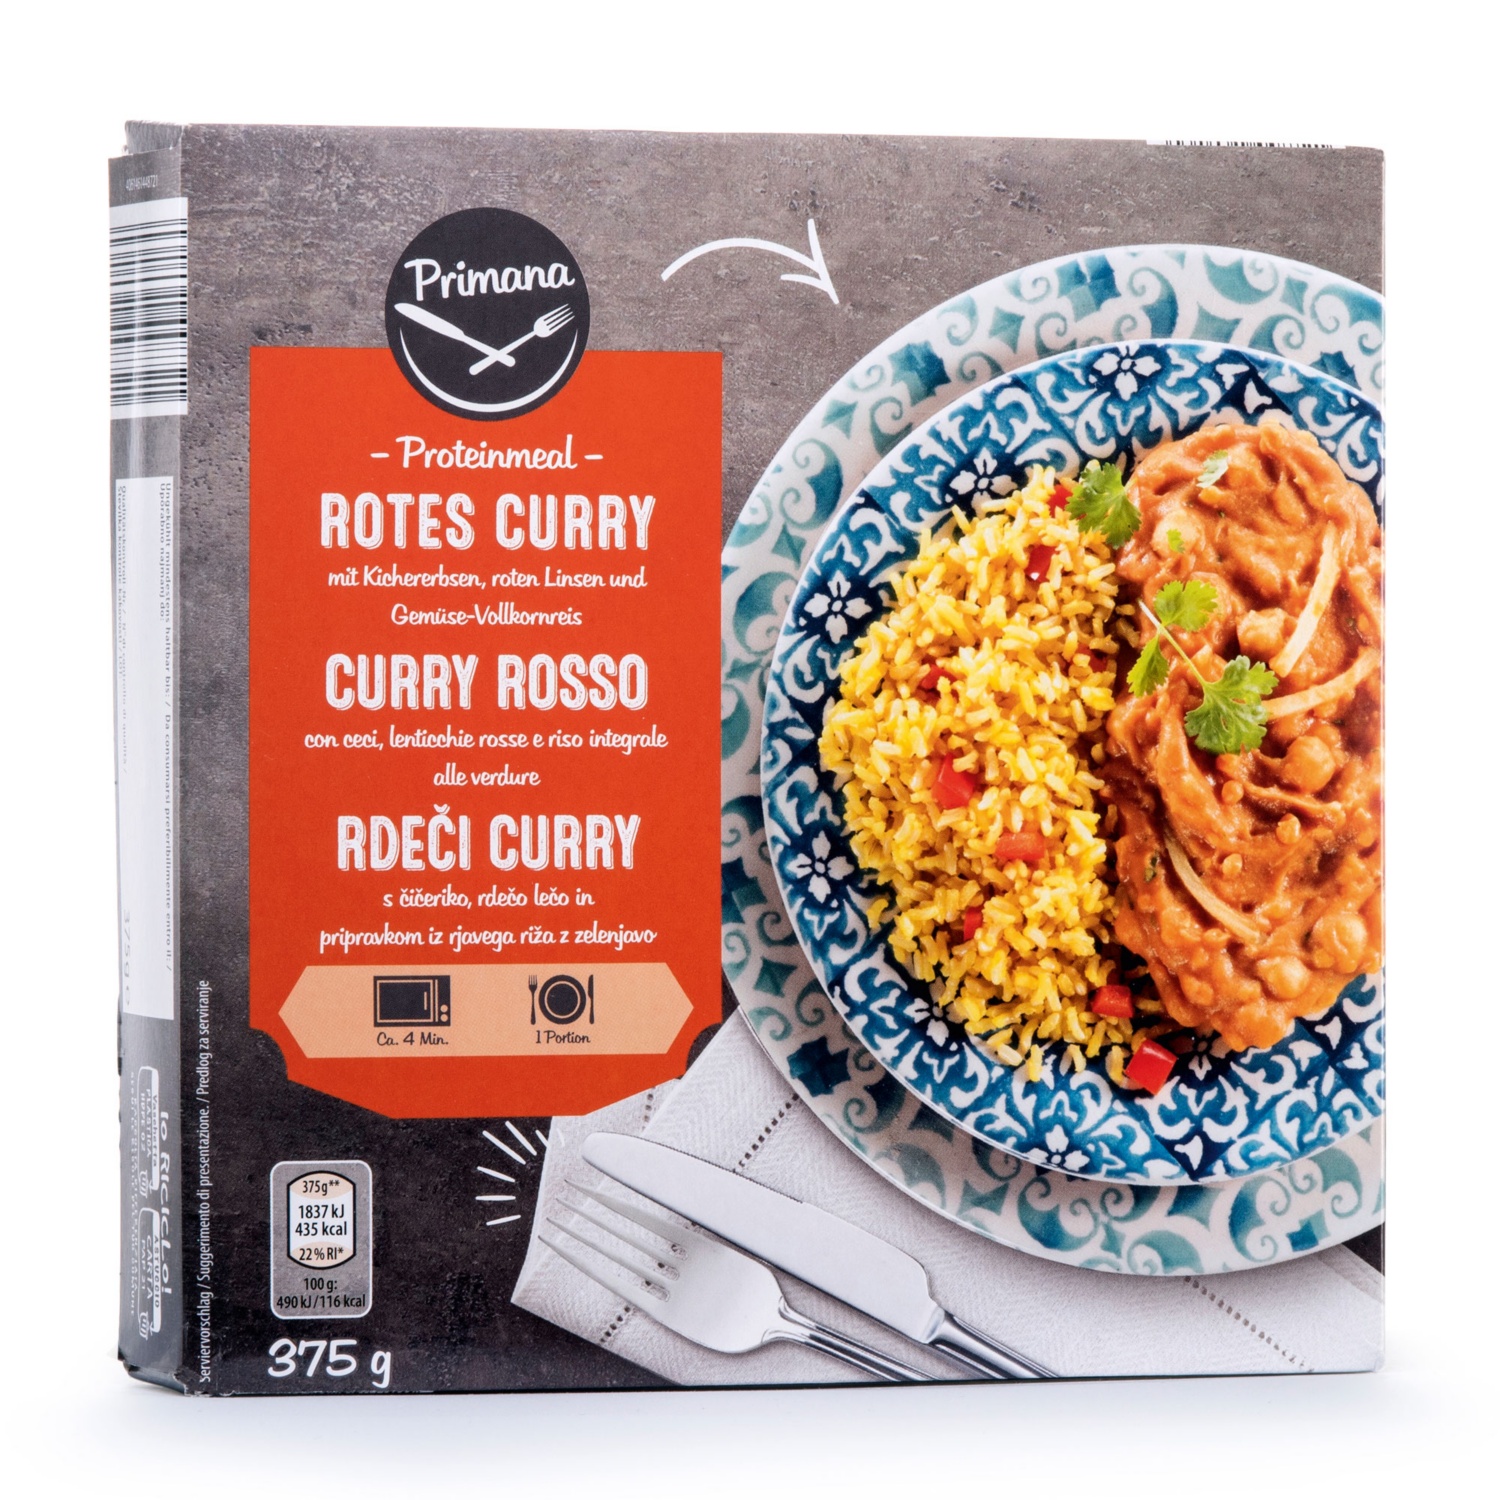 PRIMANA Proteingerichte, Rotes Curry